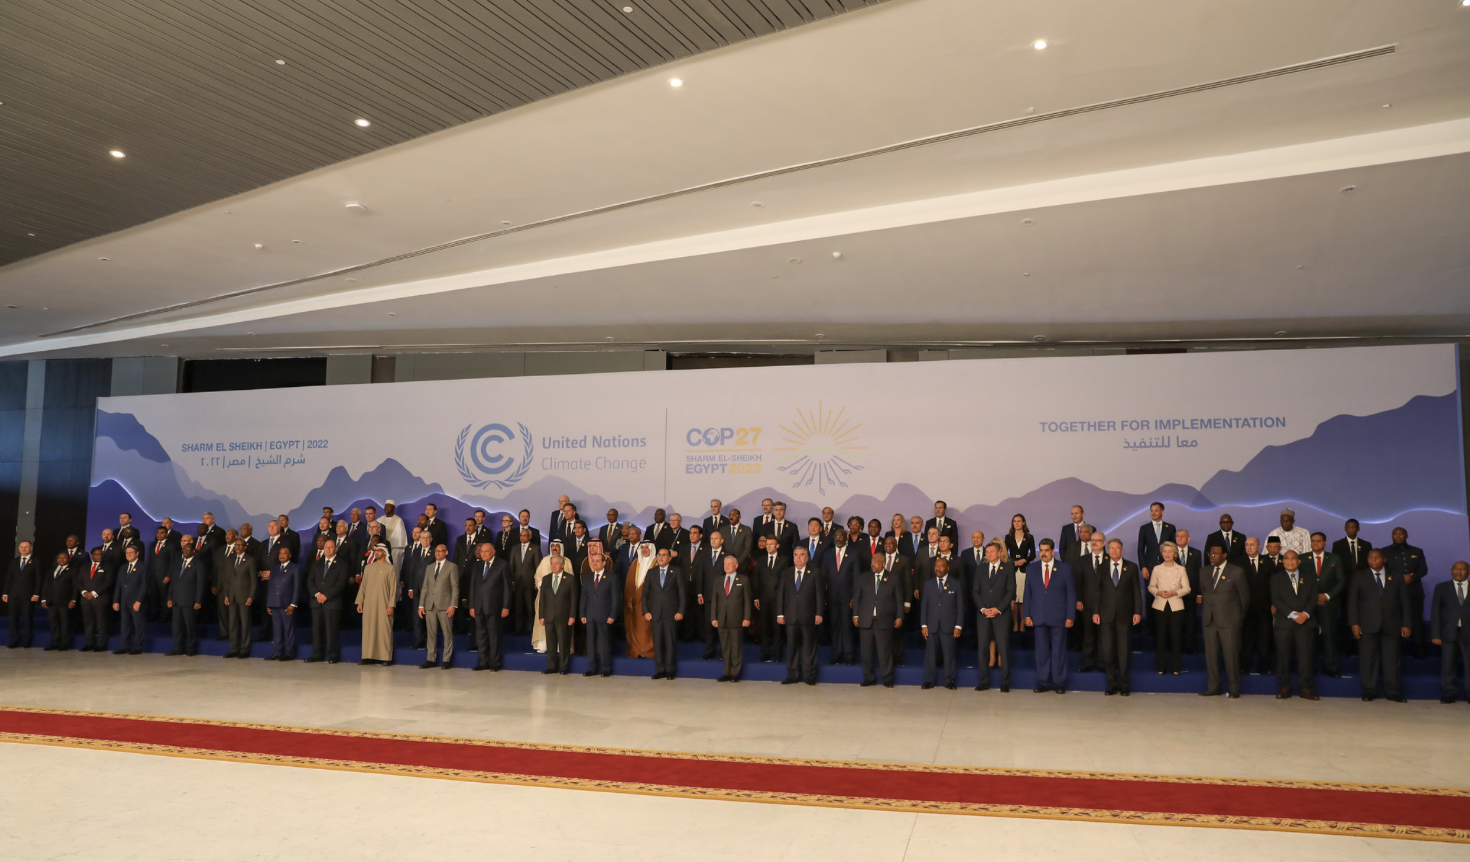 A notable absence of women at COP27. Image credit: UN Climate Change, flickr